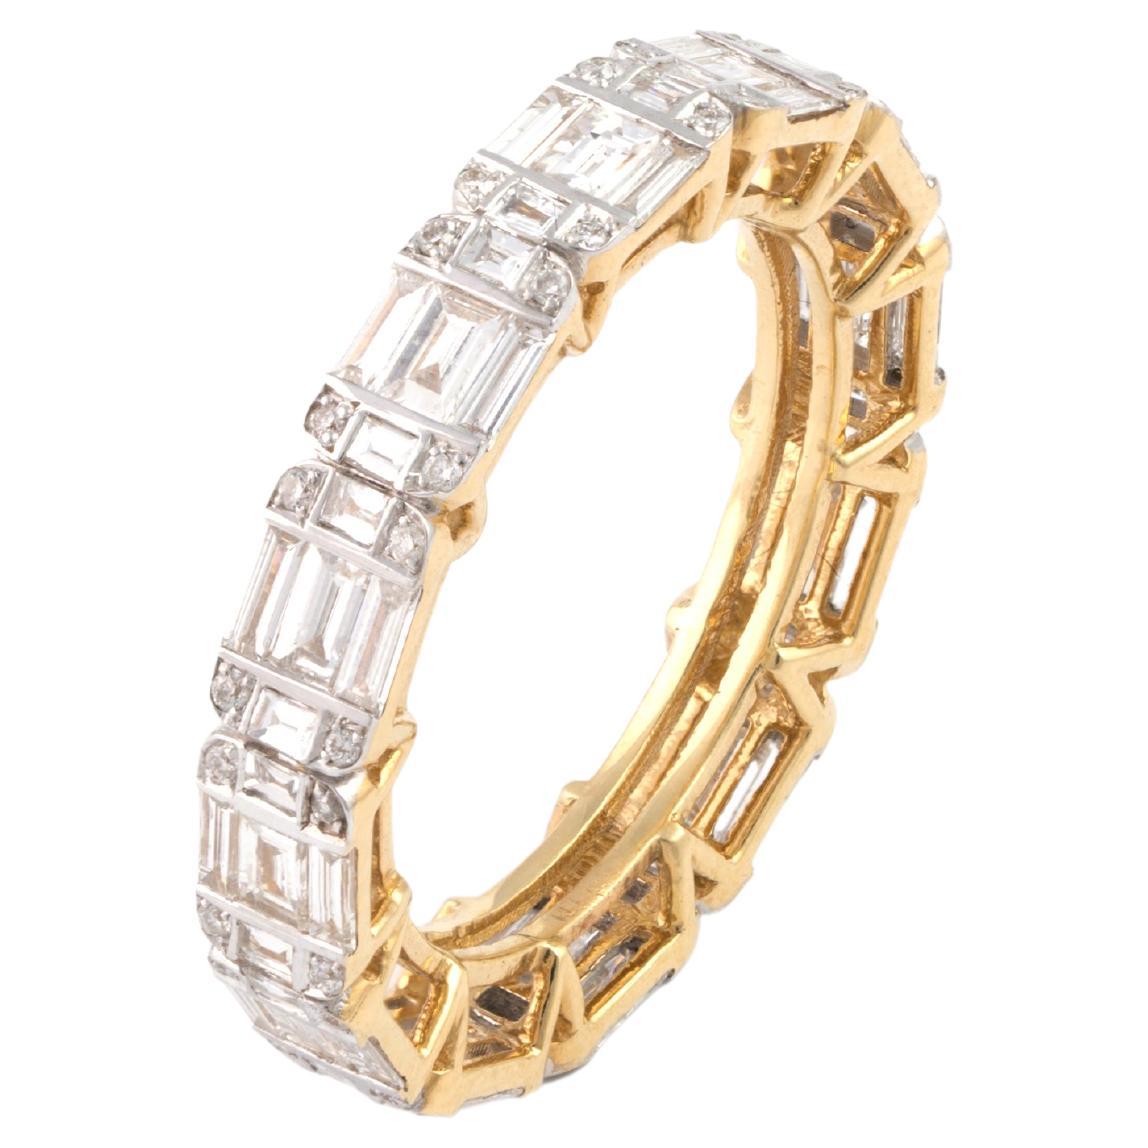 Natural Diamond 1.76cts in 18k Gold 3.75gms Ring For Sale